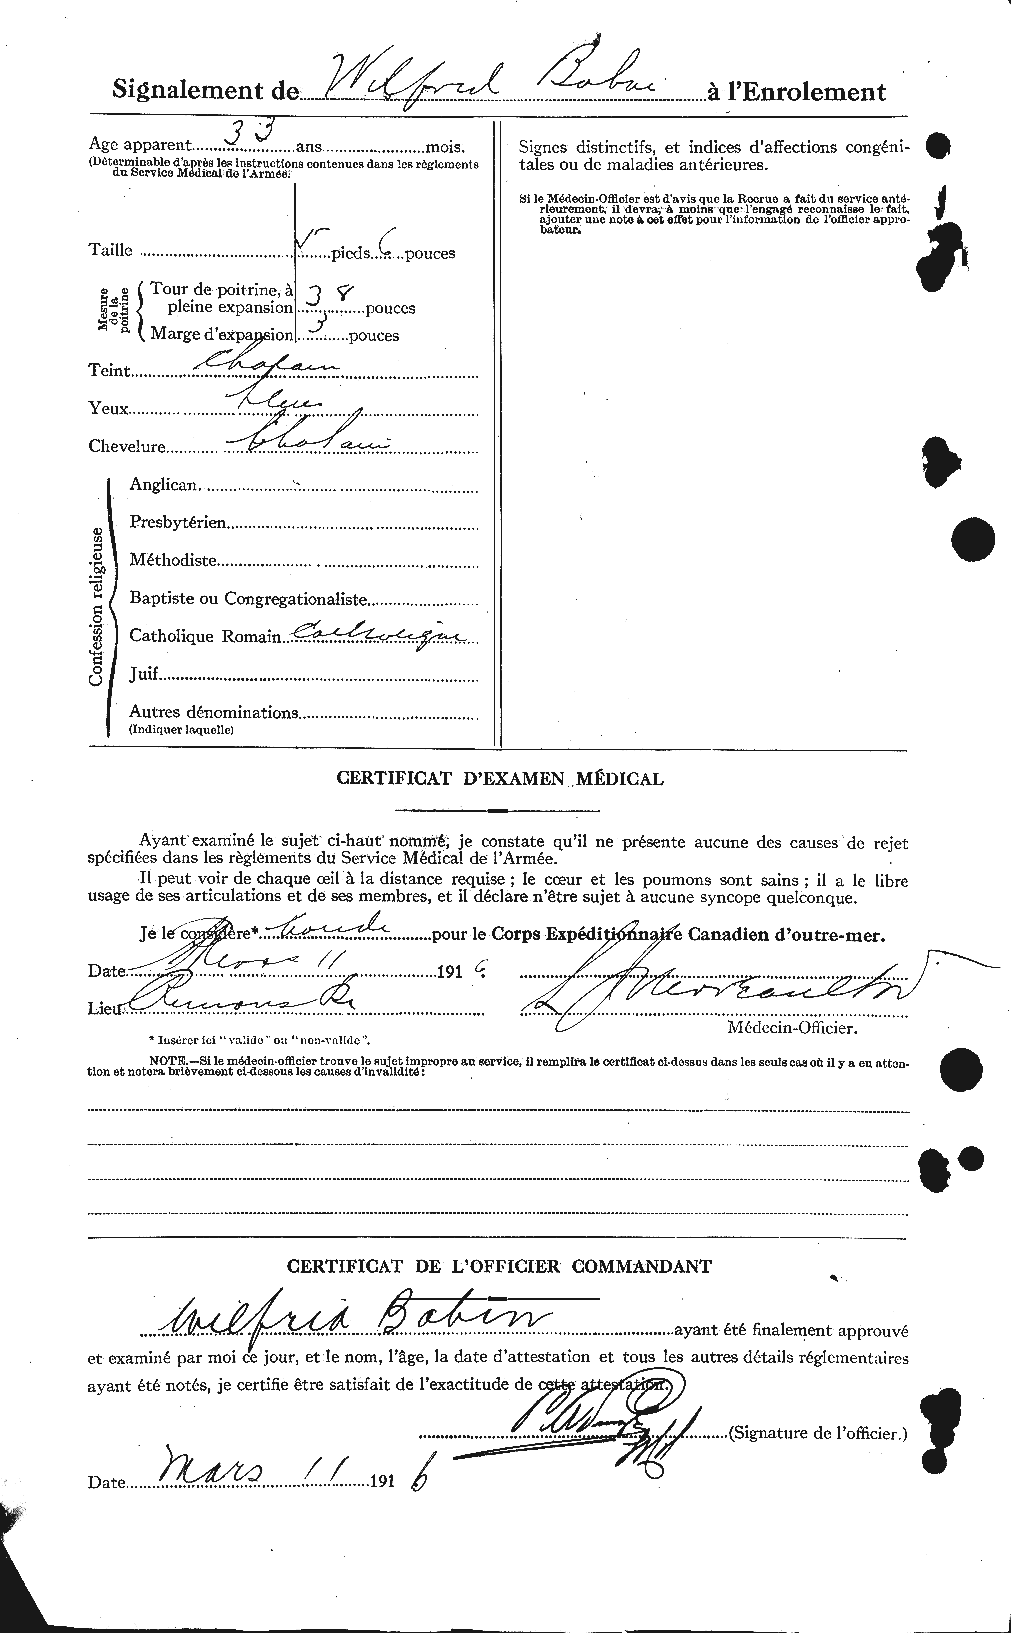 Personnel Records of the First World War - CEF 218127b